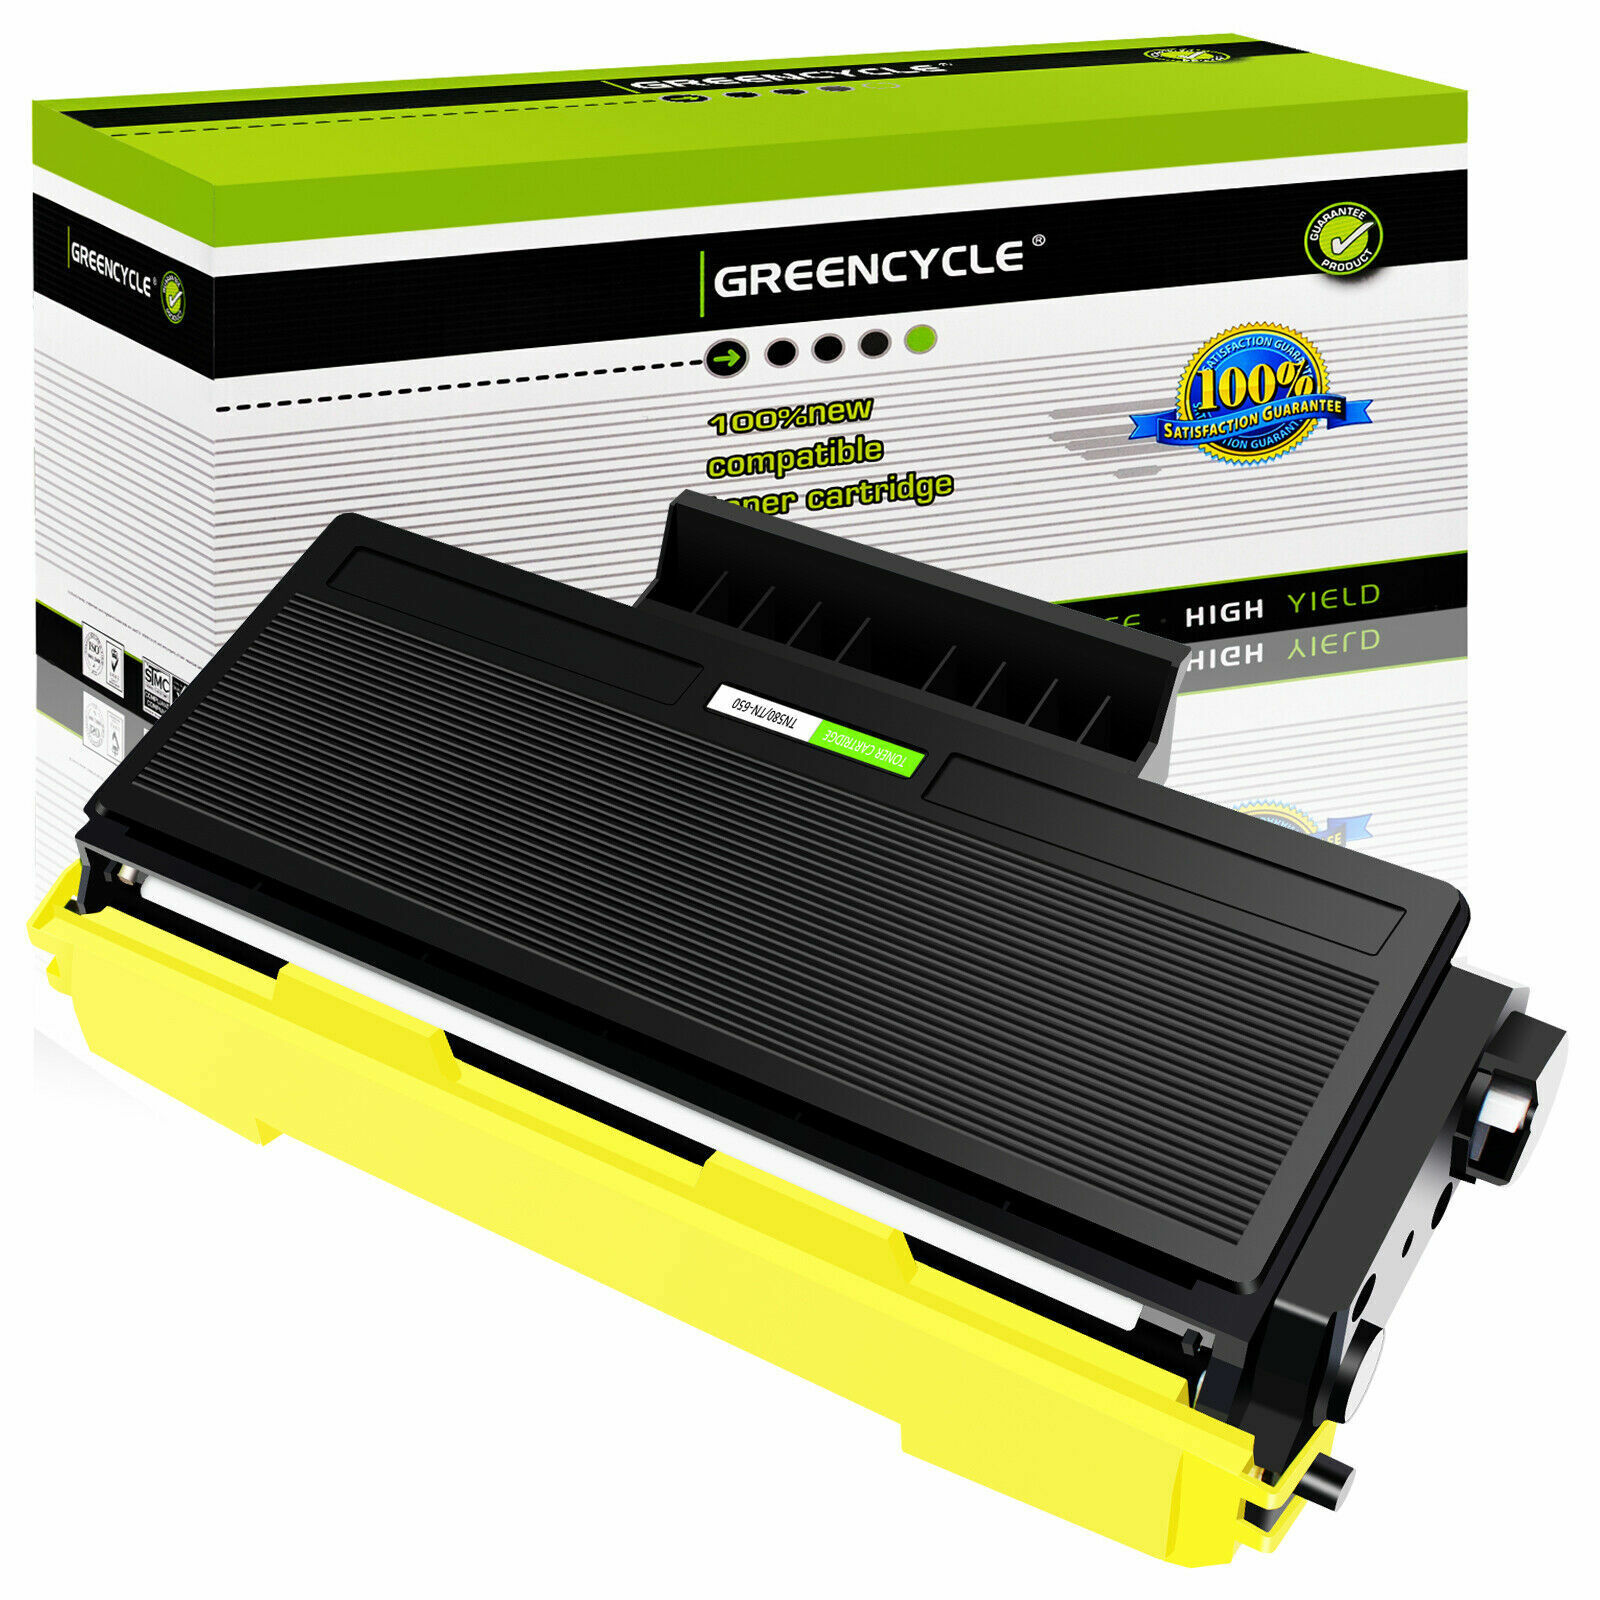 1PK High Yield TN650 Toner Cartridge For Brother MFC-8480DN 8890DW HL-5370DW